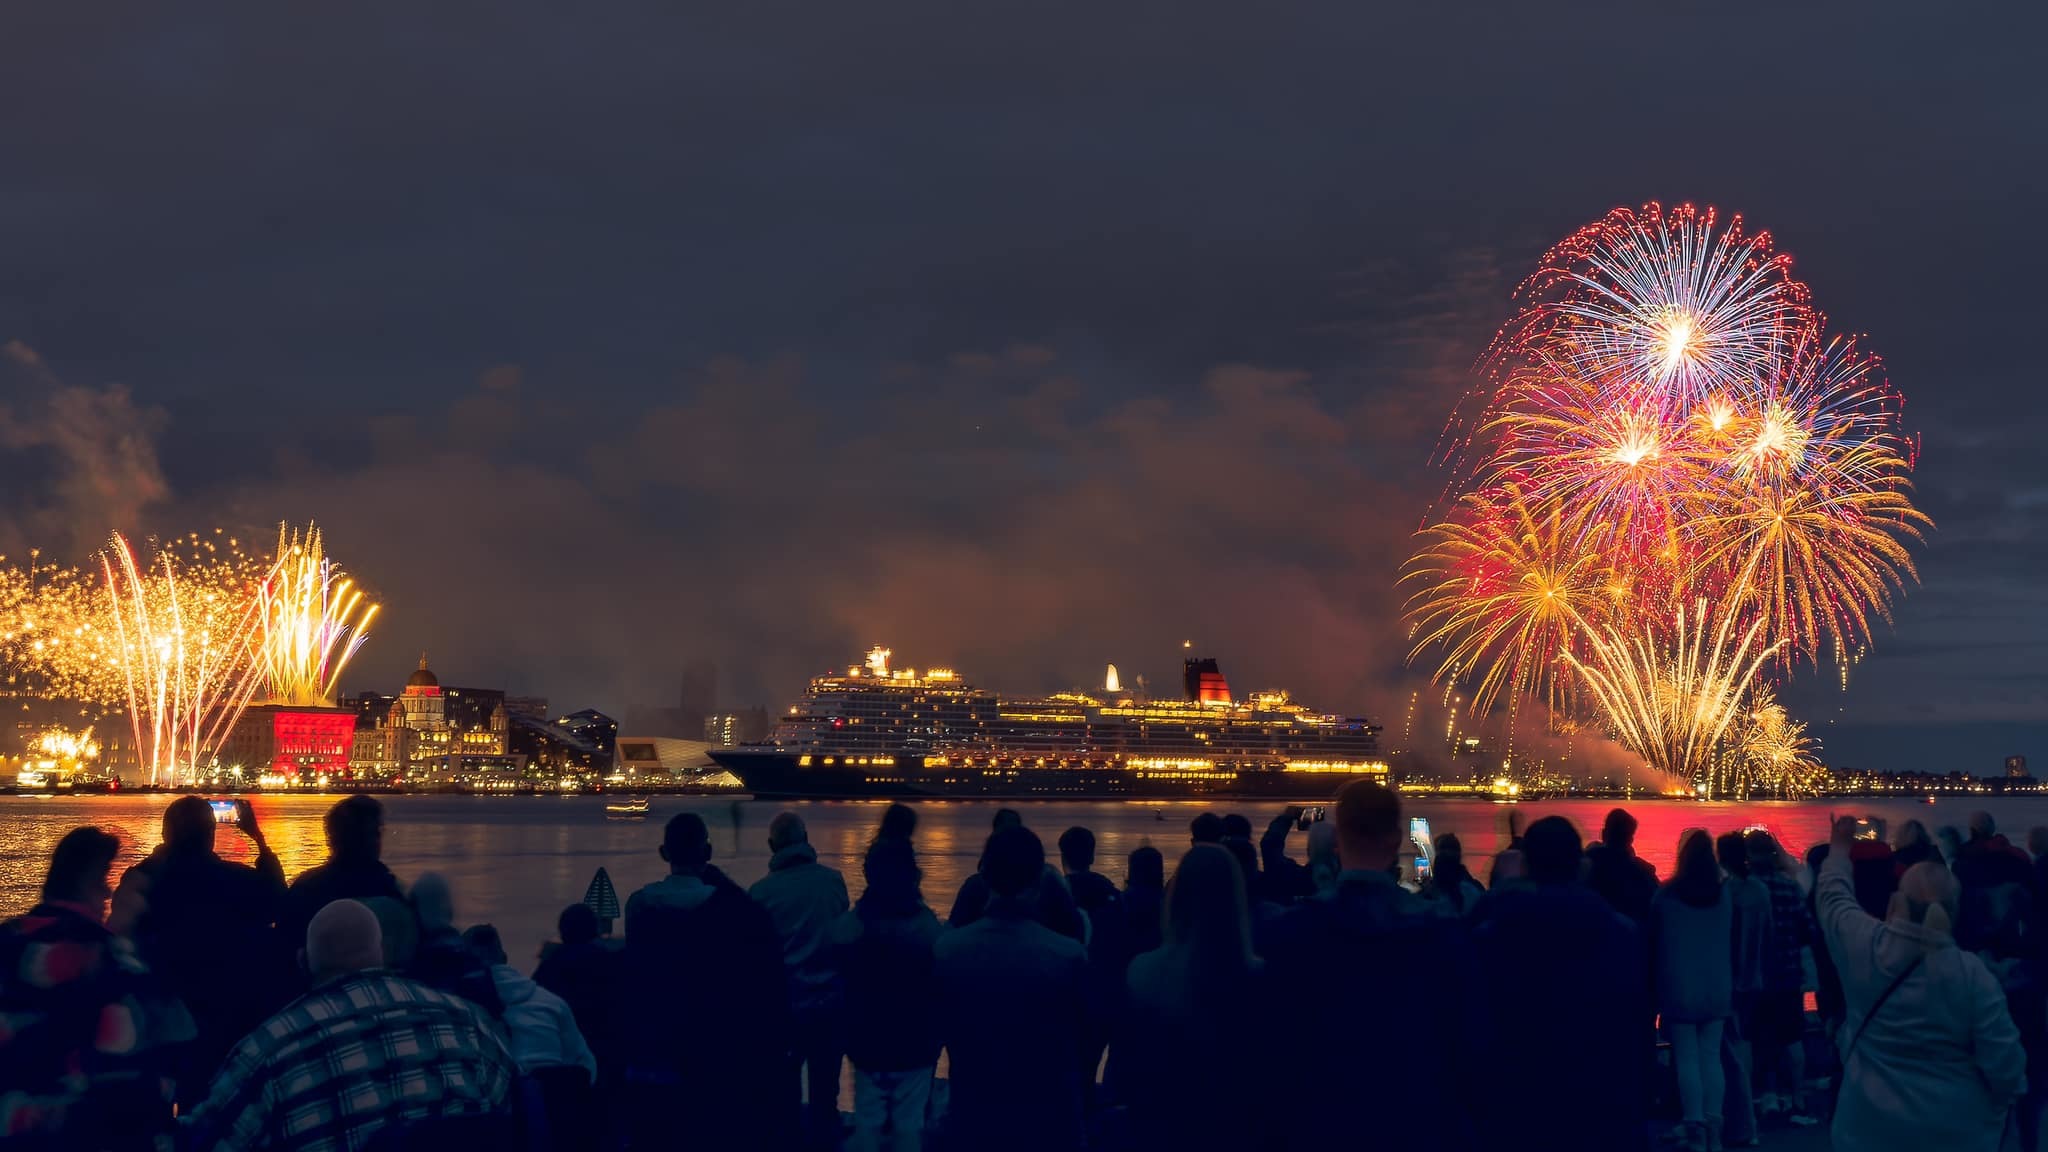 Fireworks at Seacombe by Mick Ryan